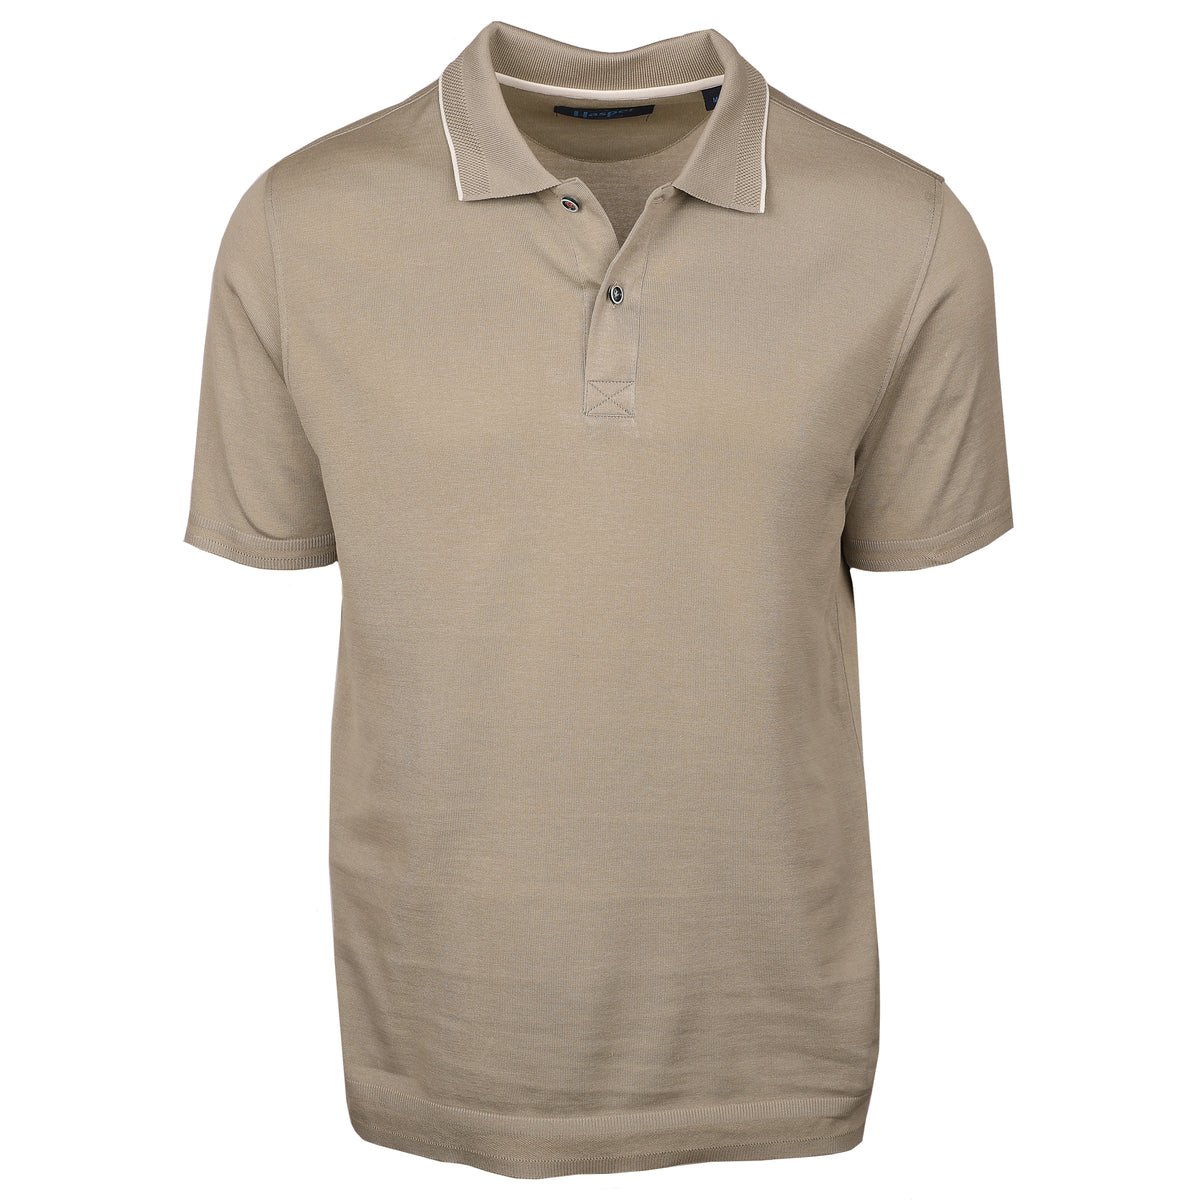 Our Sorrento Artichoke Fine Ribbed Light Weight Polo is your ticket to looking smart and feeling comfy on the course, pool, or beach. Whether you’re looking to make a statement on the links or just chill out in style, this artichoke tan polo is perfect for any occasion. Lightweight and finely ribbed, this polo is sure to keep you feeling fine and free!